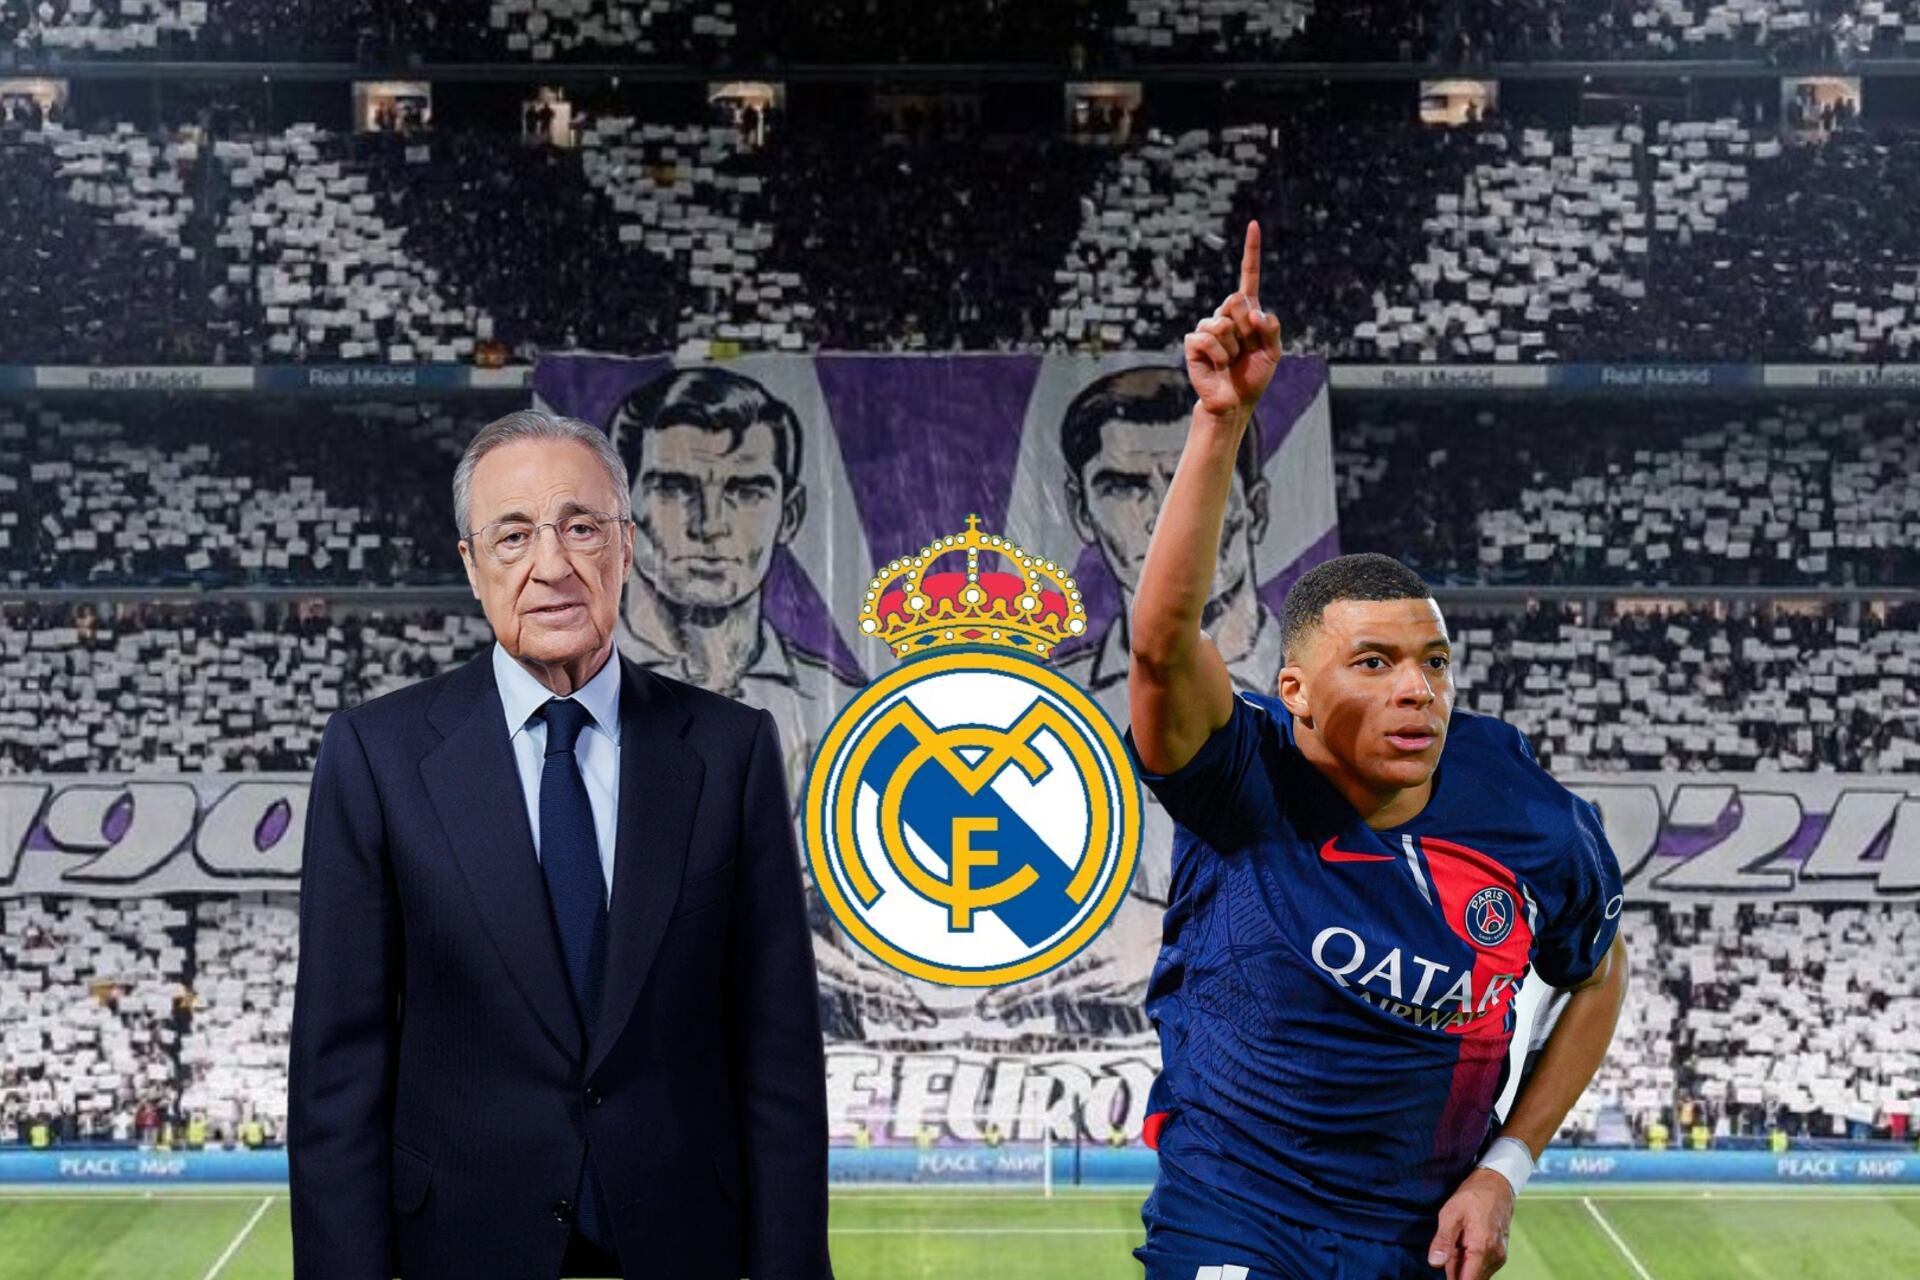 Real Madrid's main objective they want to achieve with Mbappé's arrival but it's not UCL, what Florentino Perez wants